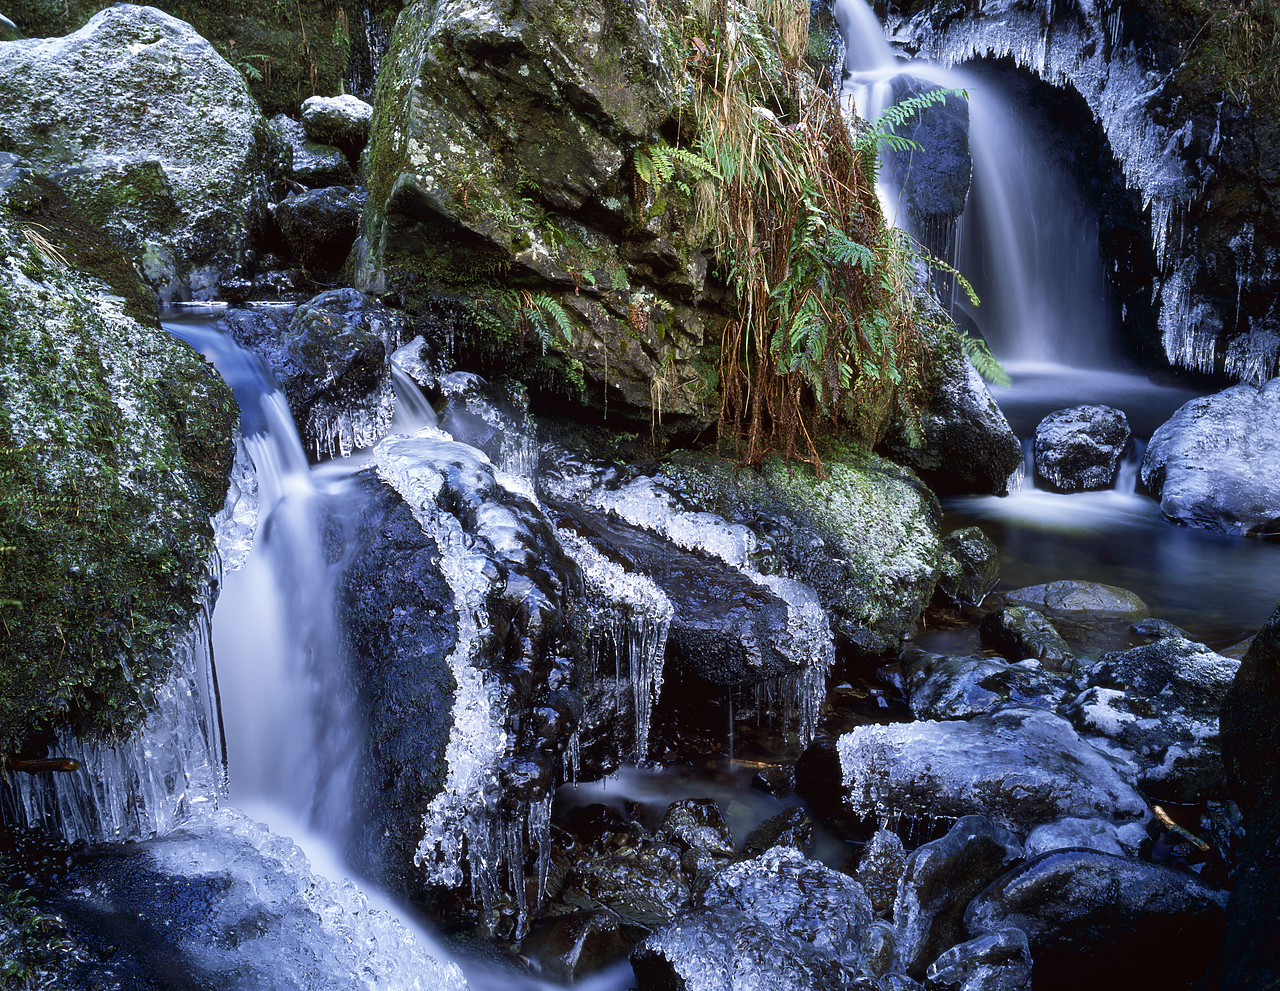 #030014-1 - Ladore Falls in Winter, Lake District National Park, Cumbria, England